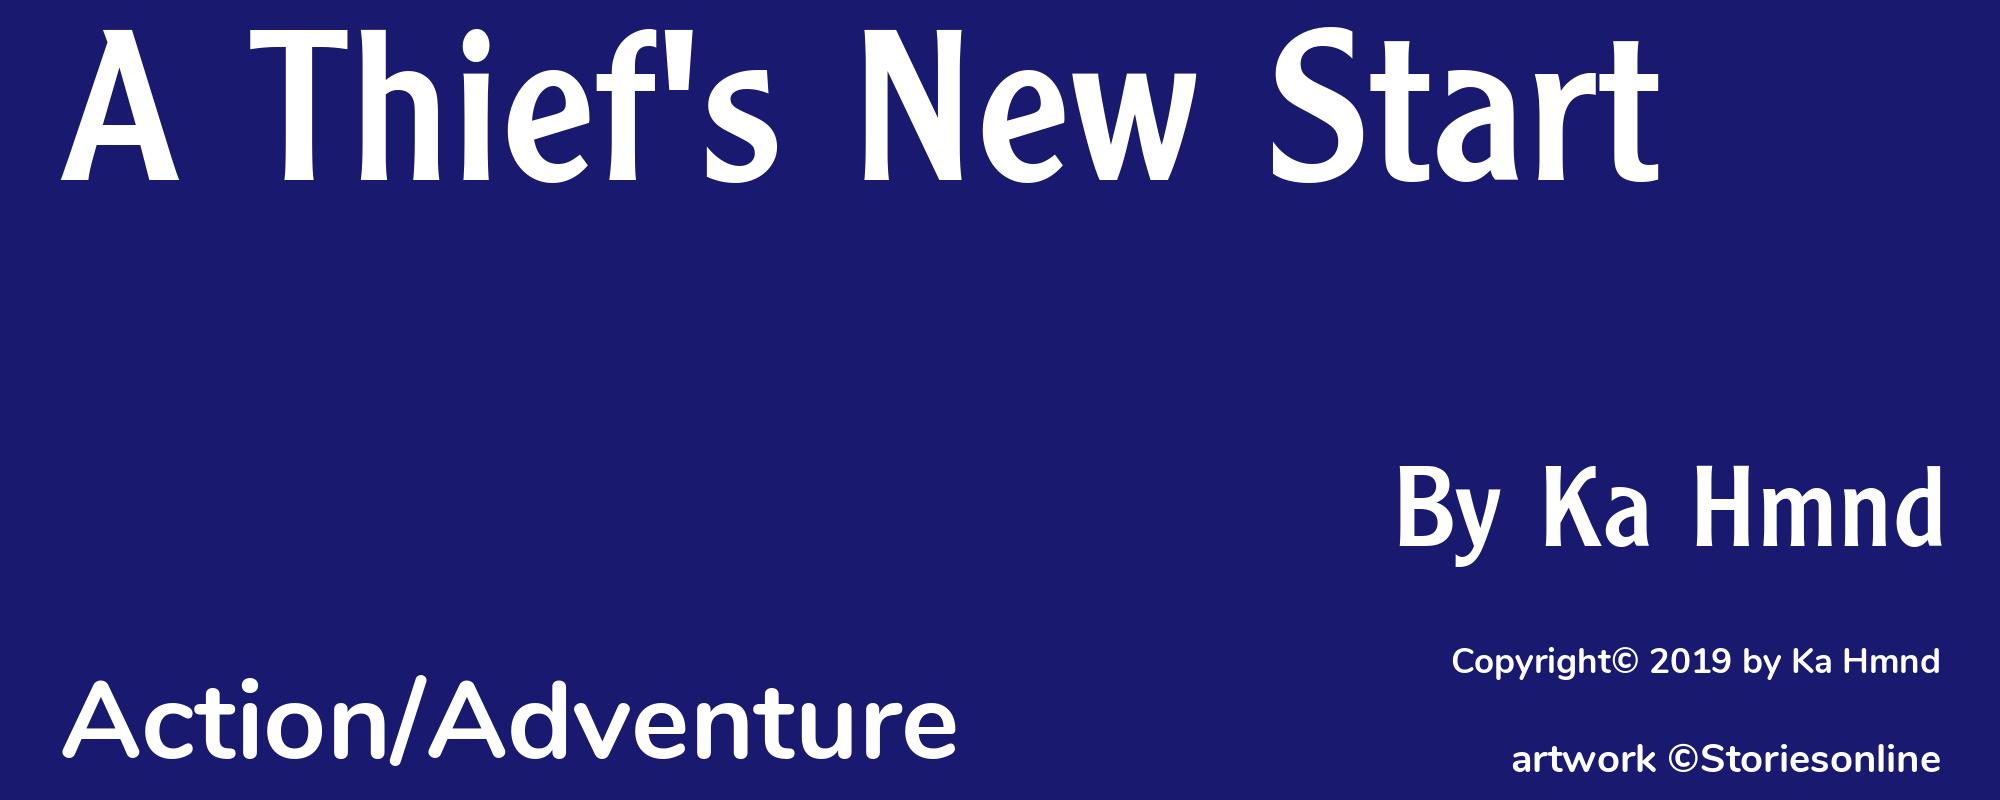 A Thief's New Start - Cover